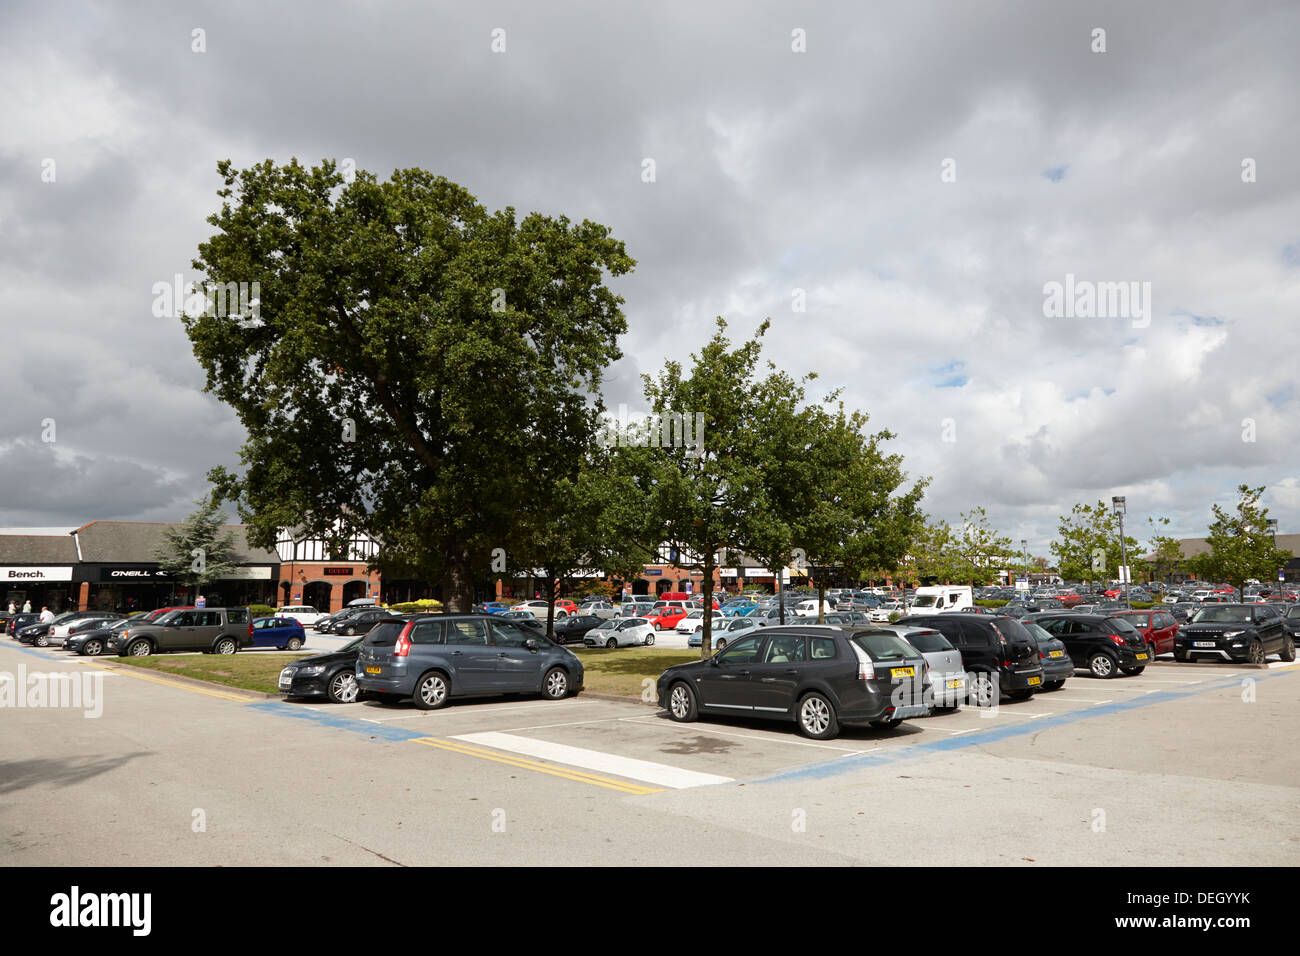 car park at cheshire oaks designer out of town retail discount outlet Stock Photo